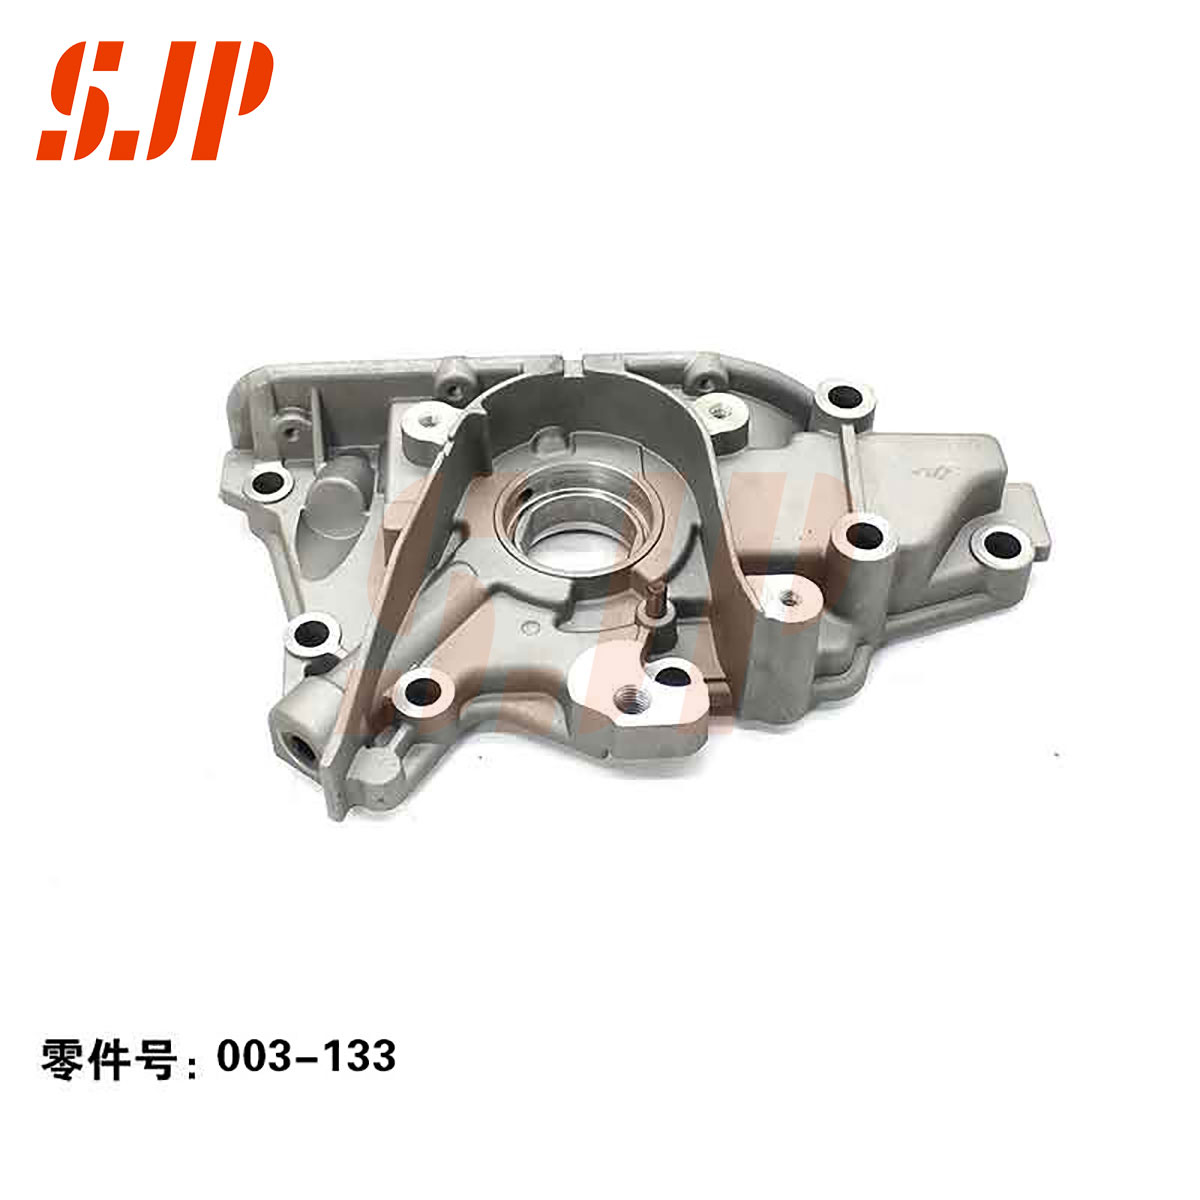 SJ-003-133 Oil Pump For UU 472/372 Chery 472/372/Not in common use